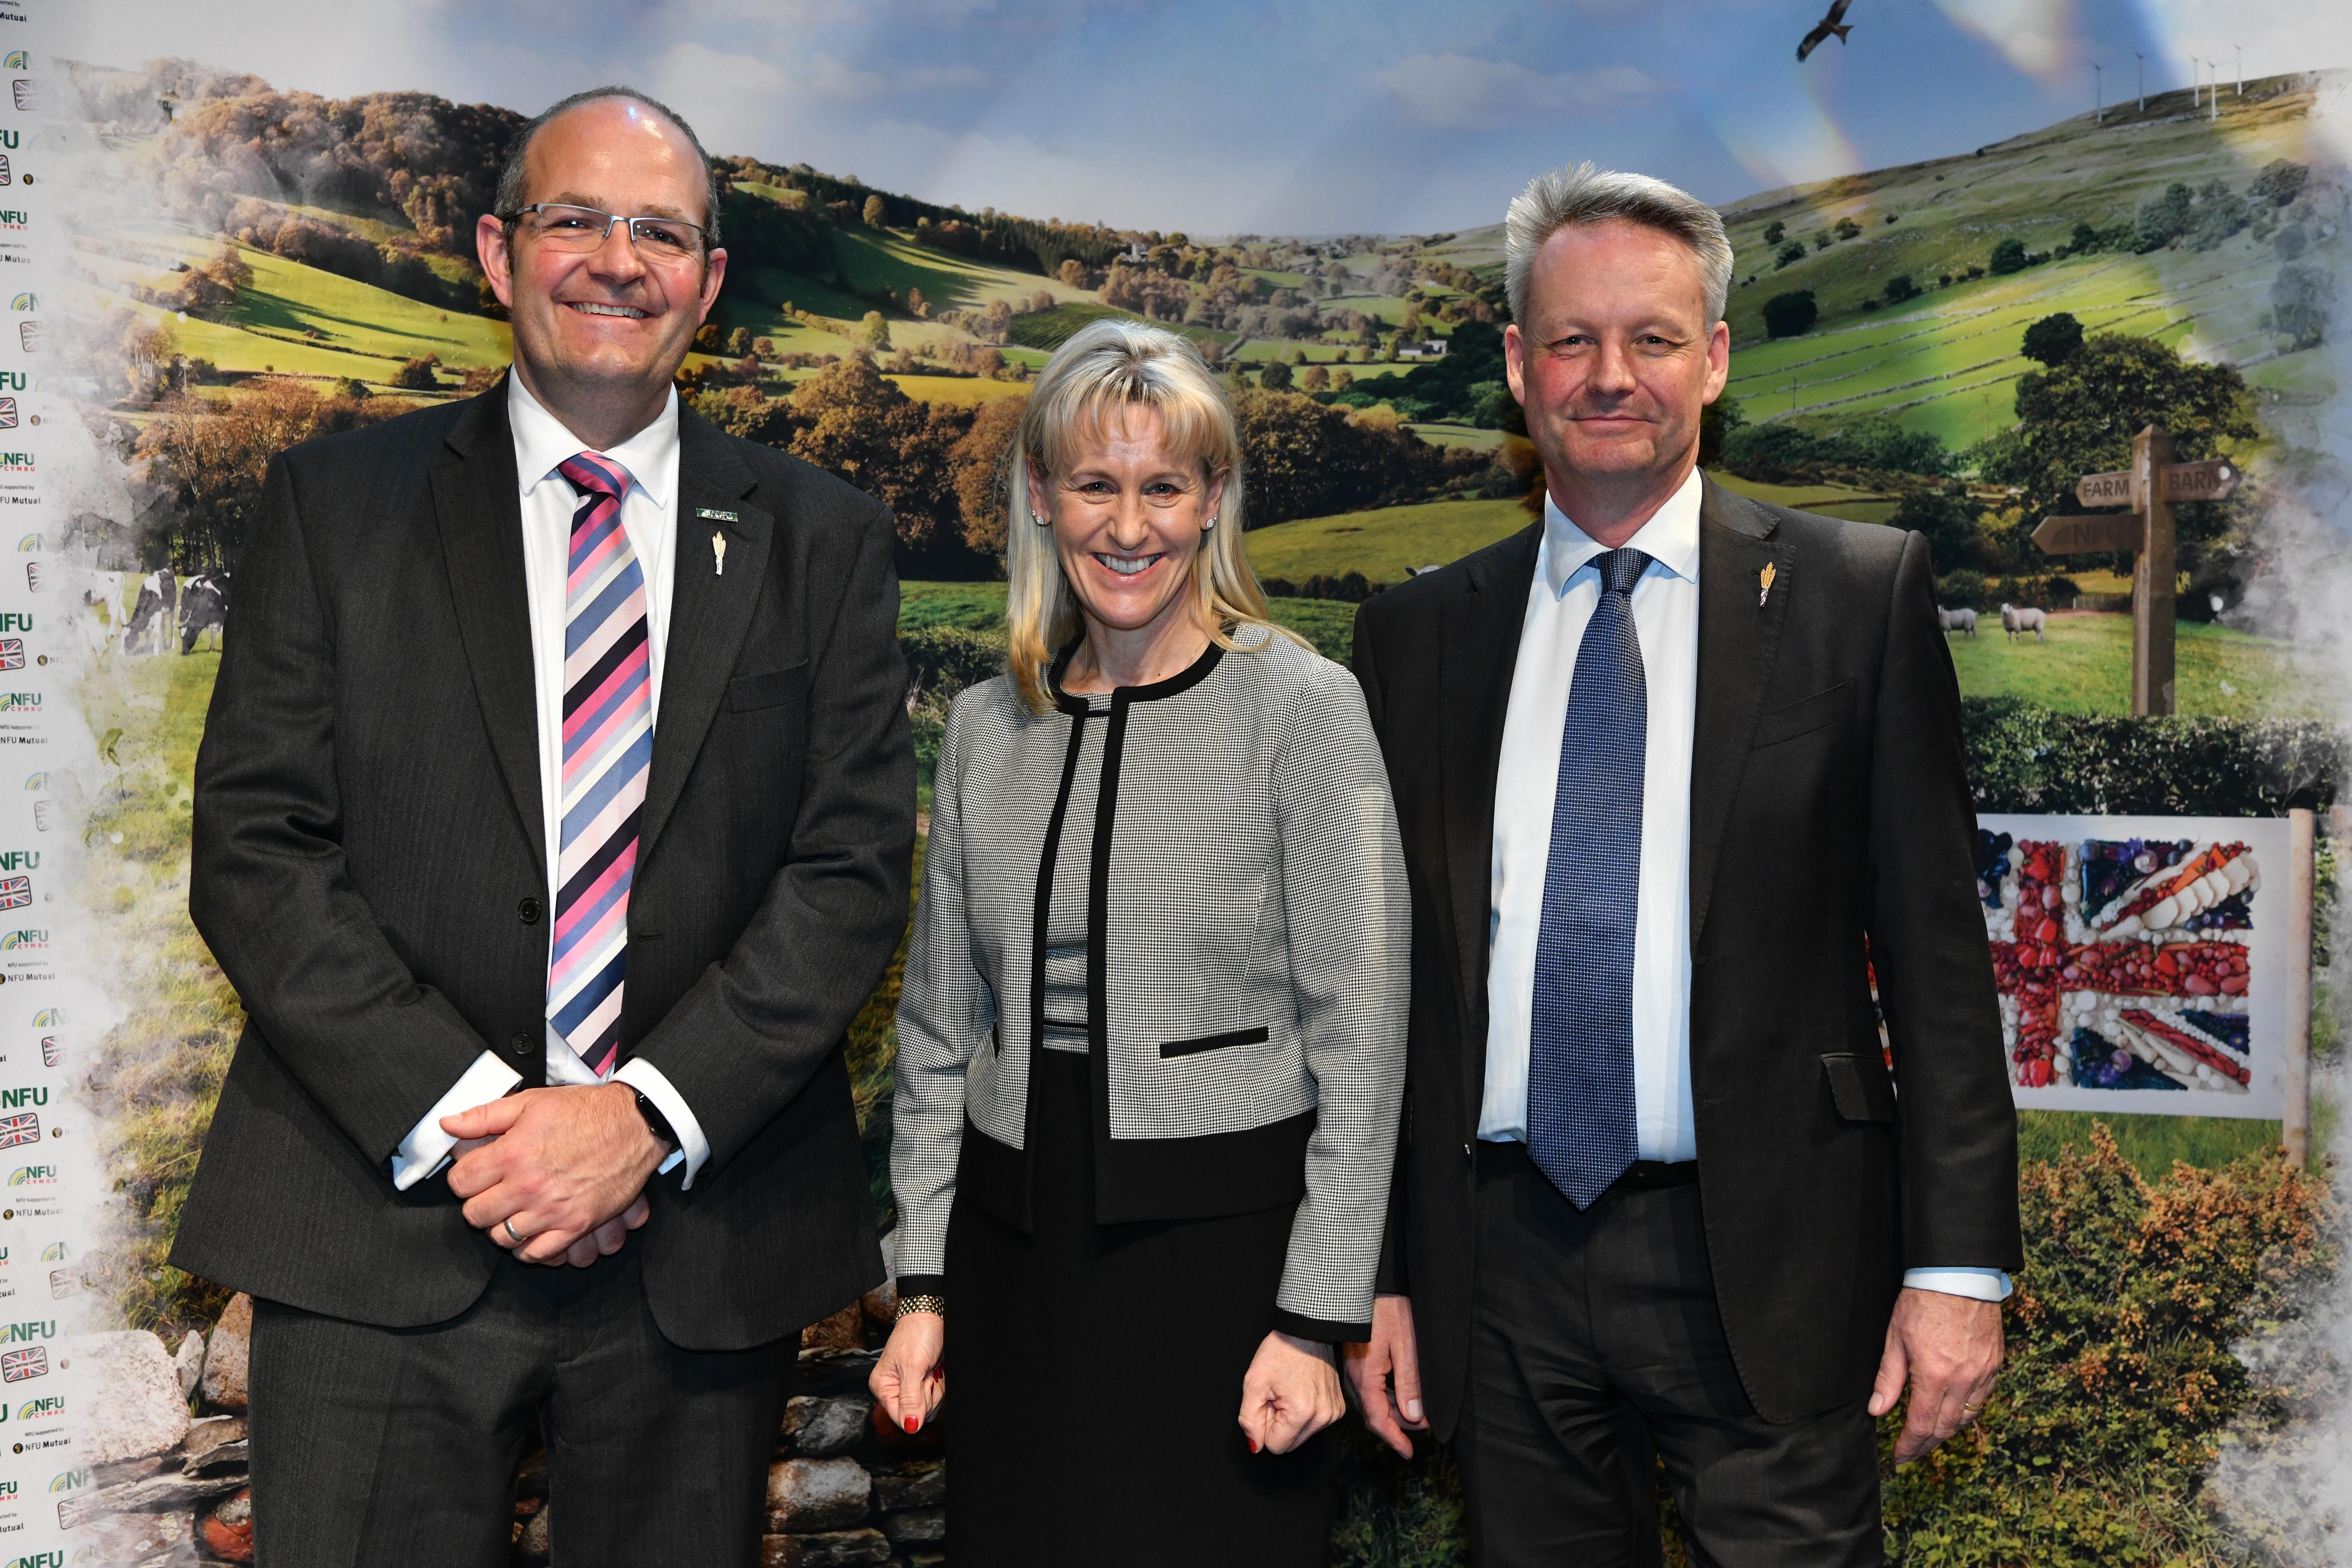 A photo of the NFU officeholders.